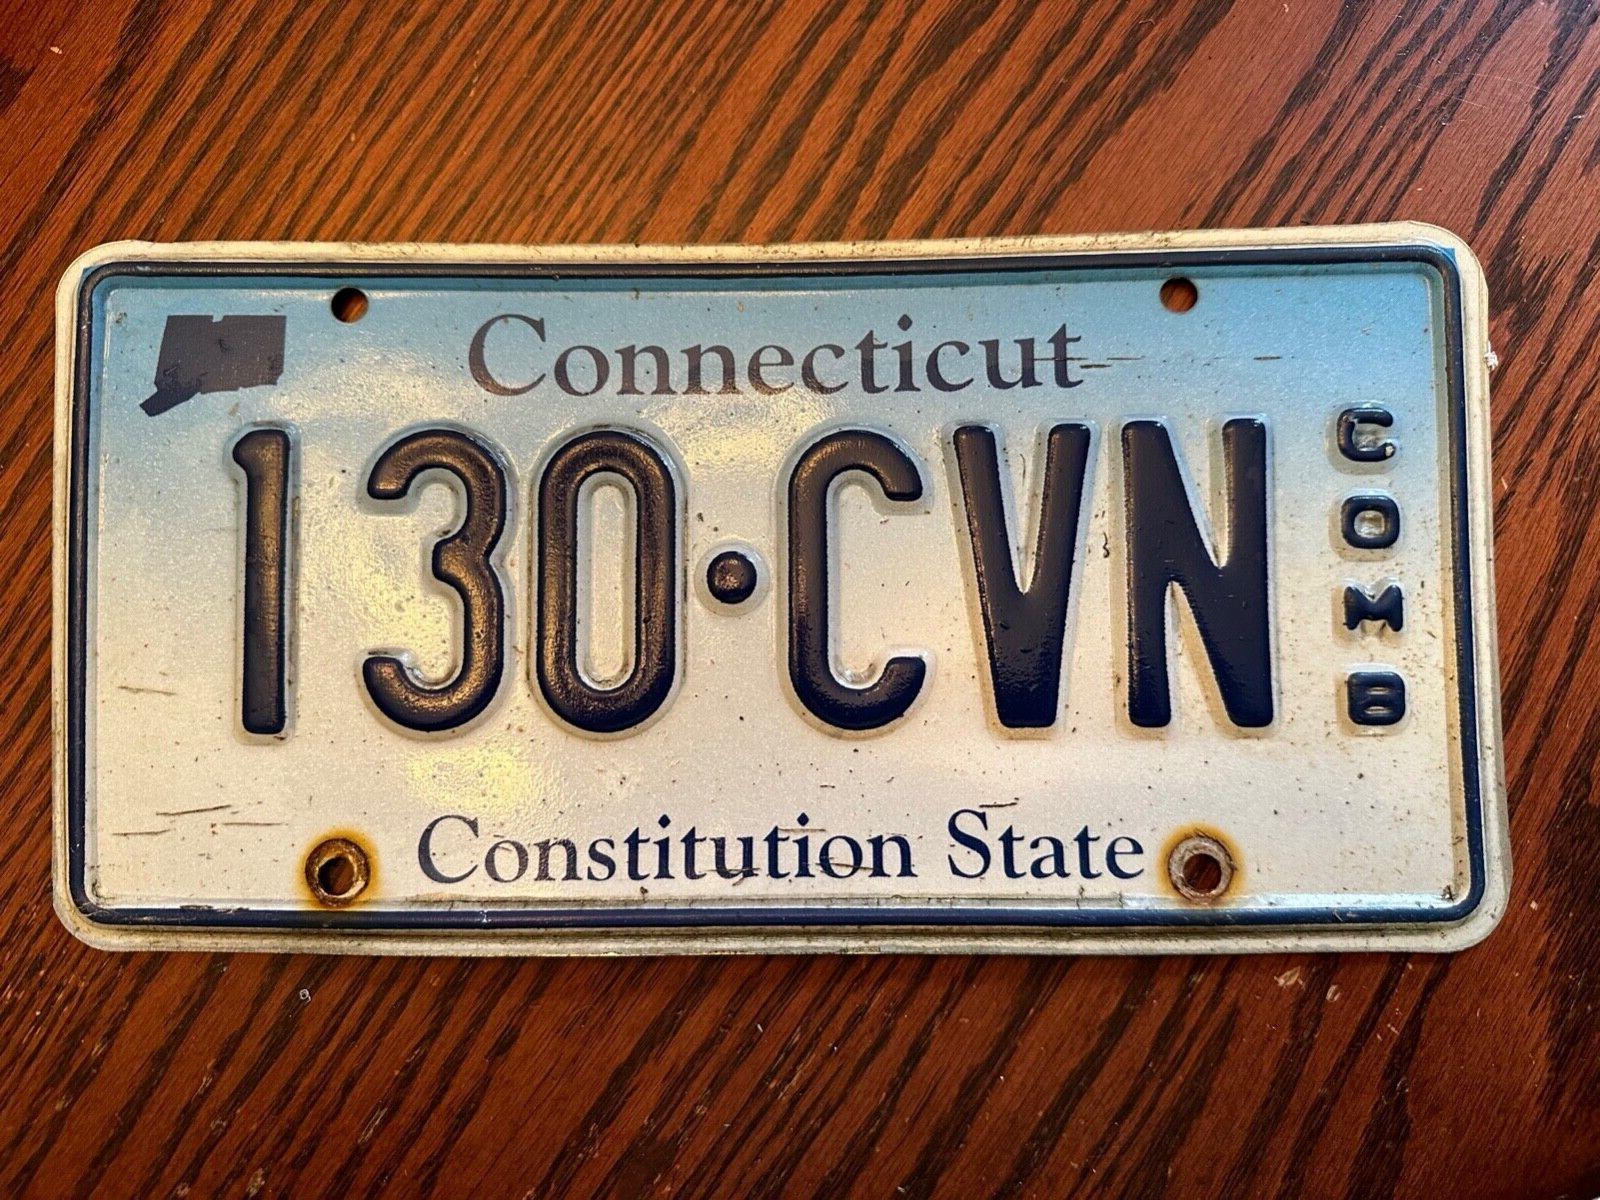 Connecticut Commercial License Plate 130 CVN Constitution State 2000\'s CT COM B